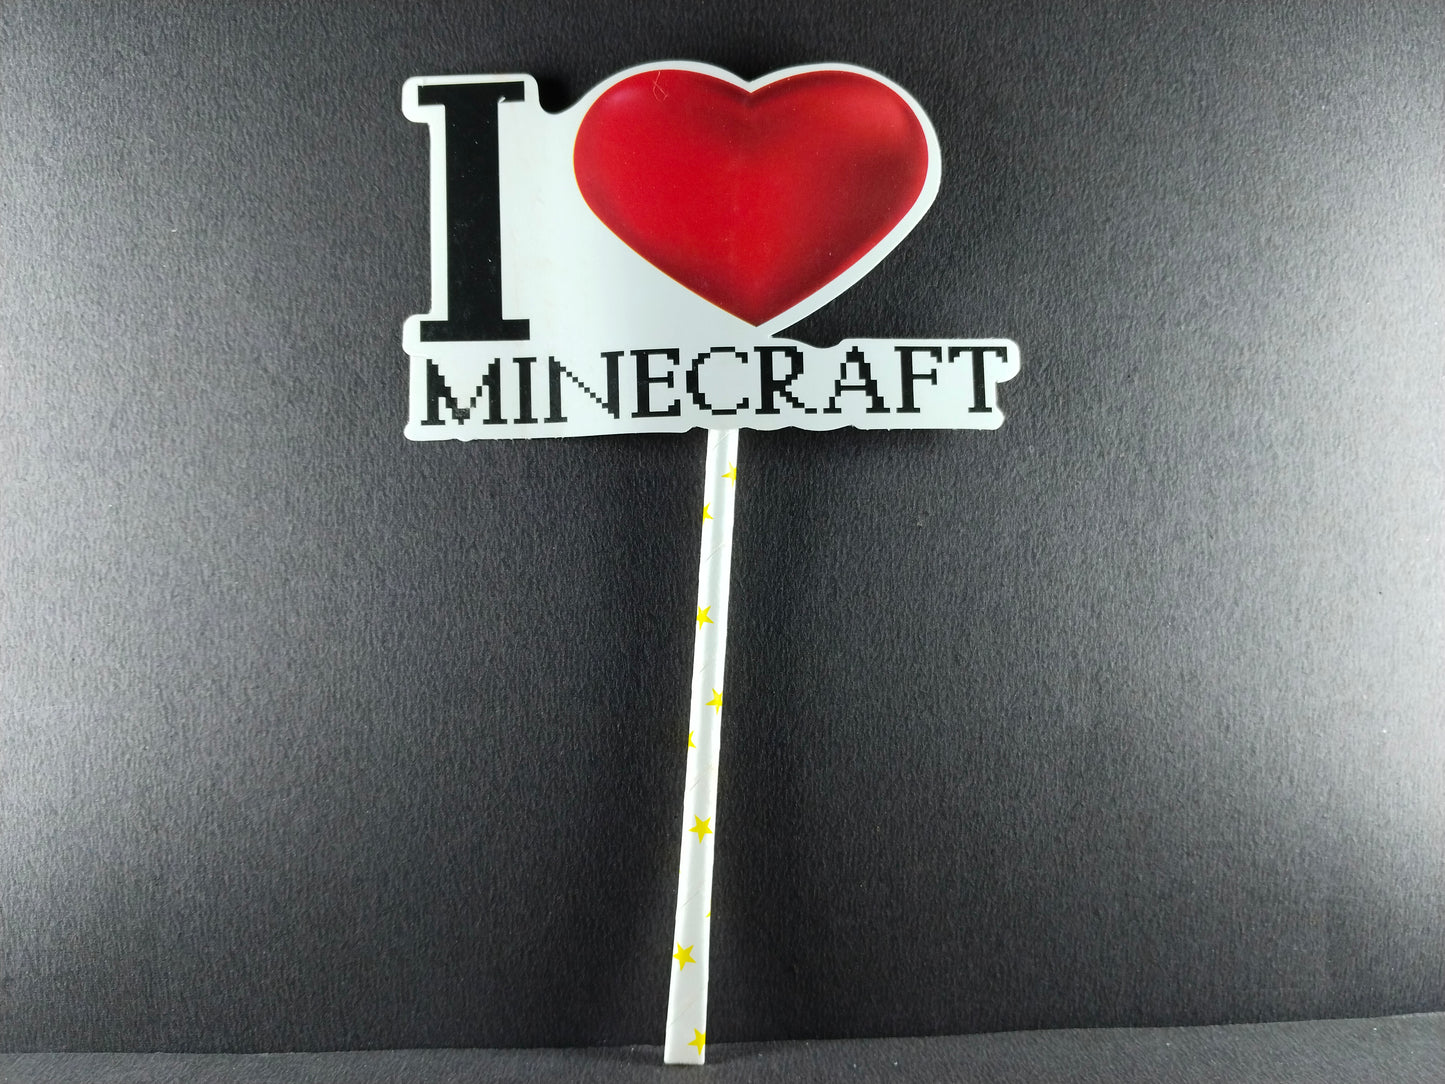 Birthday Decoration Kit - Mine Craft Theme for Simple Birthday Decorations at Home